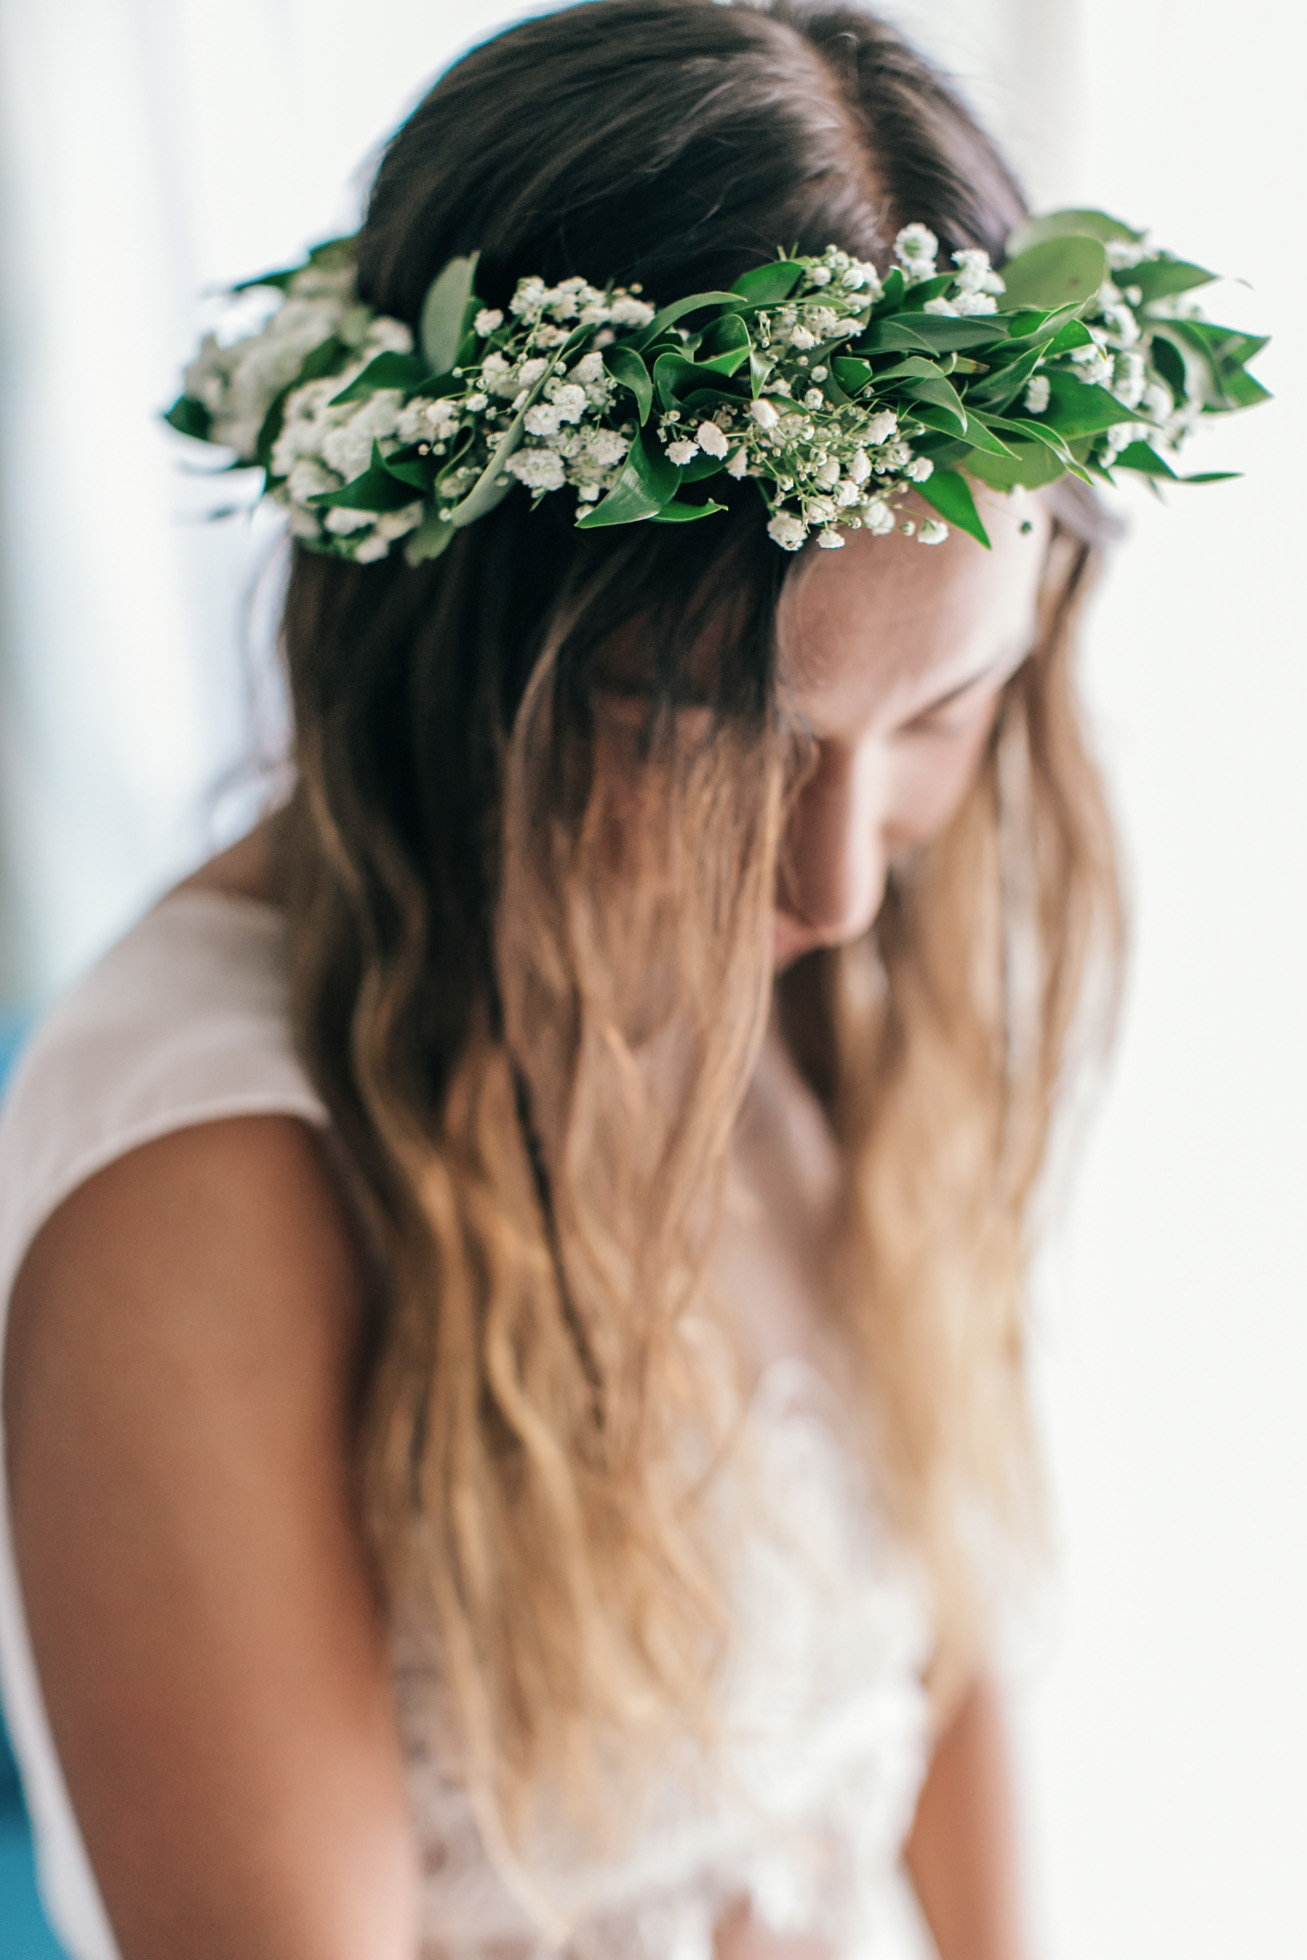 Beautiful boho bride wearing a handmade green flower wreath during bridal preparations for a beach ceremony.